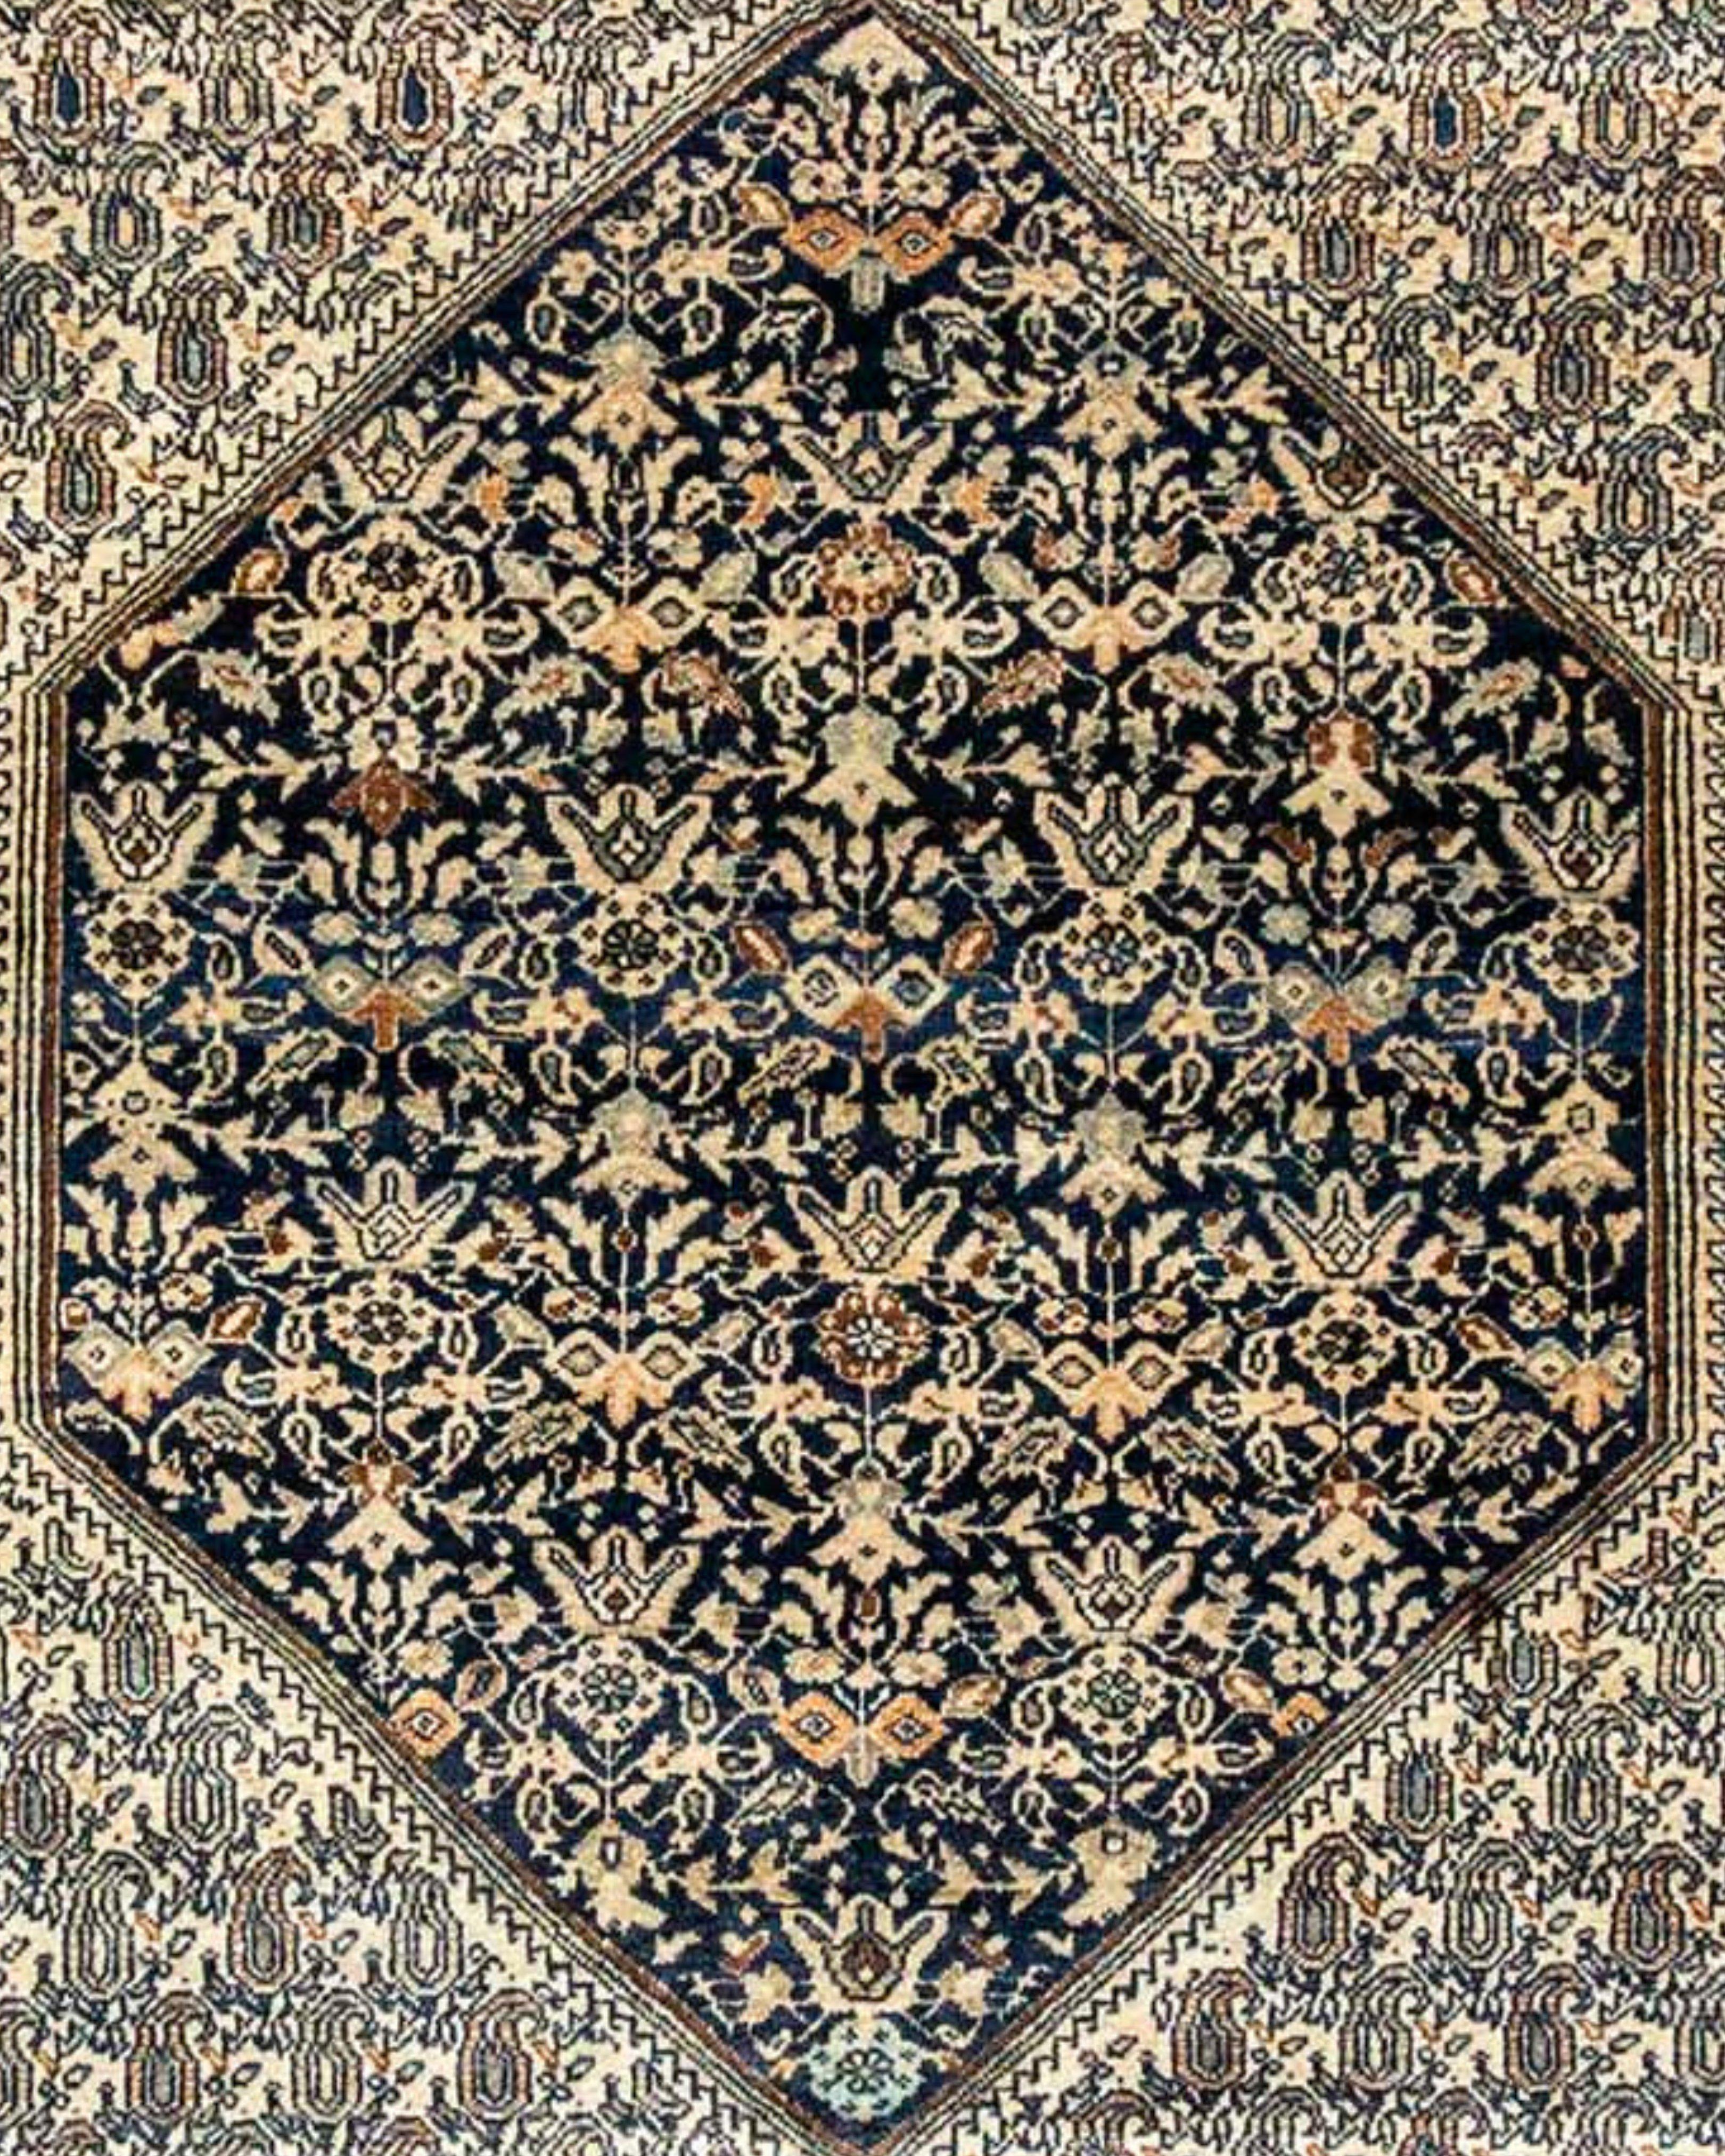 Antique Persian Fereghan Sarouk Rug, Late 19th Century

Additional Information:
Dimensions: 4'2